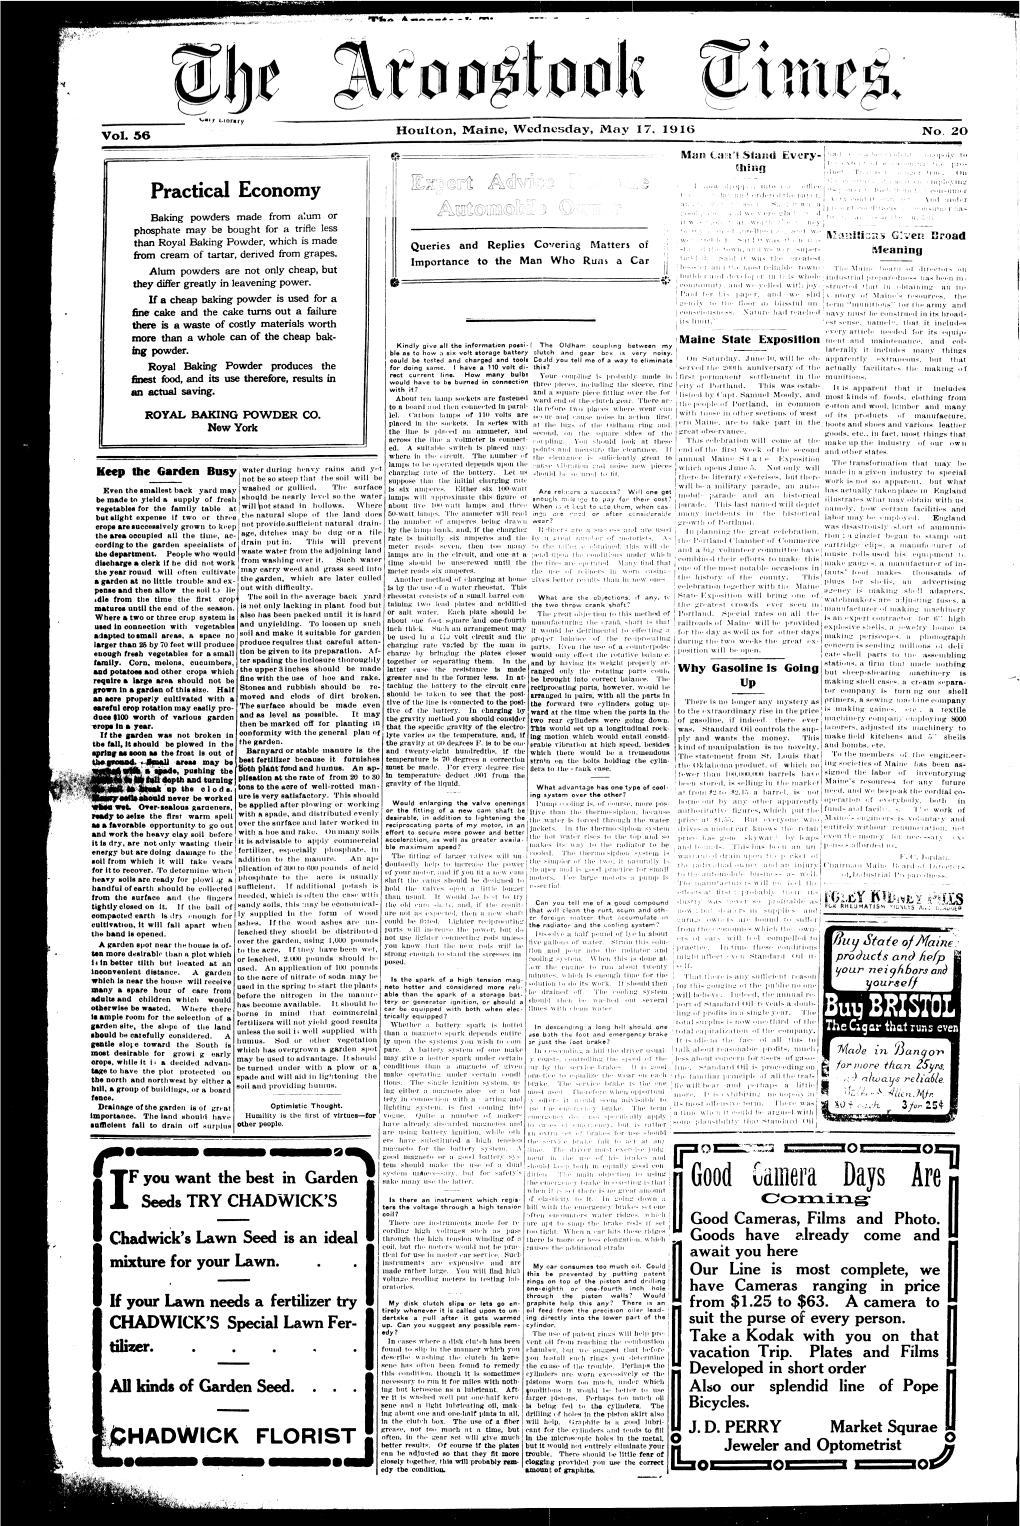 The Aroostook Times, May 17, 1916